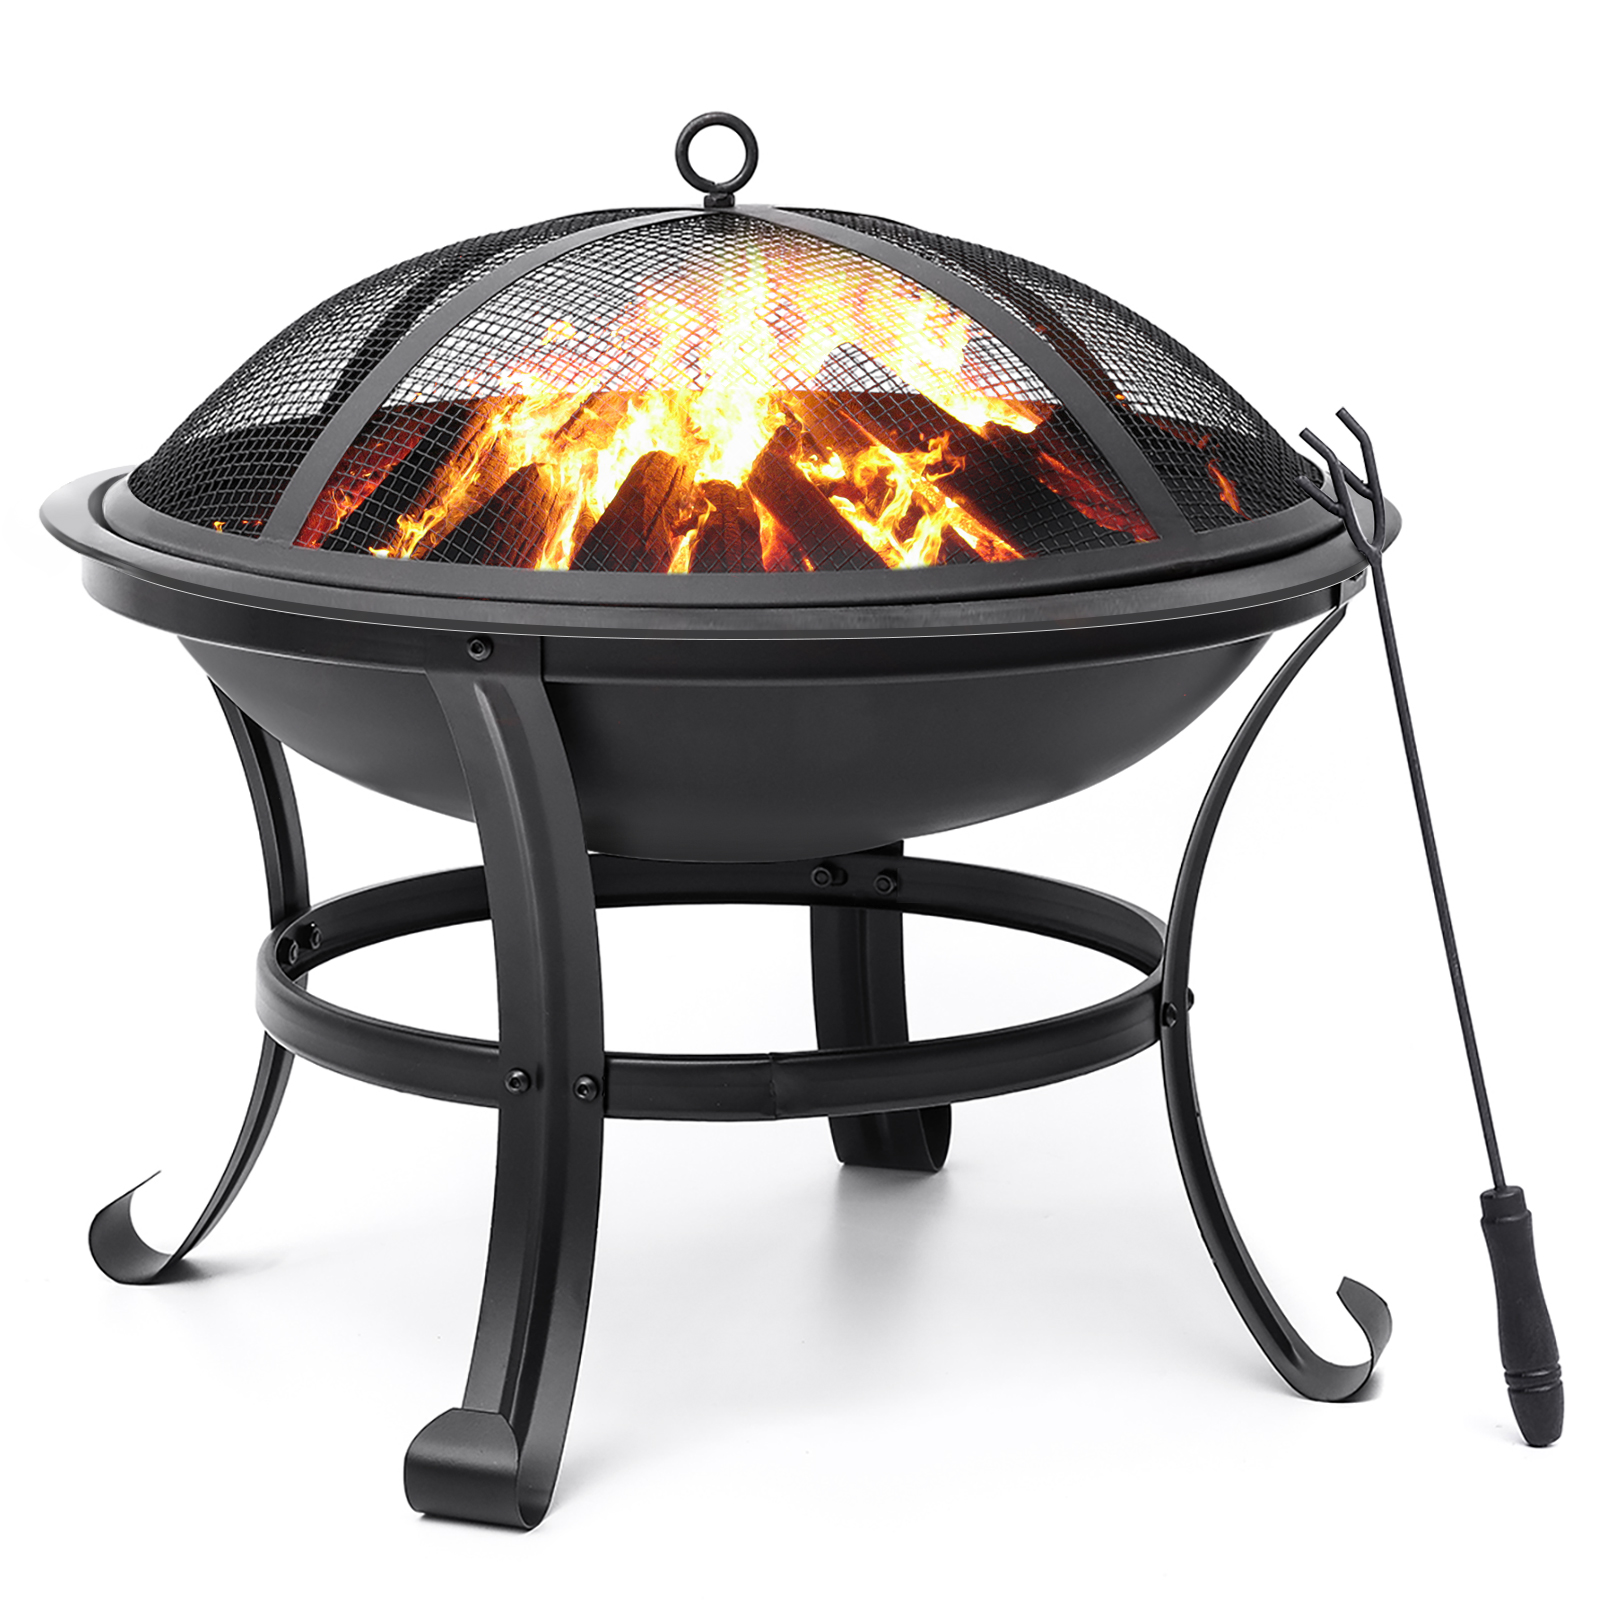 Kingso 22 Fire Pit Outdoor Wood Burning, Fire Pit Bowl Cover